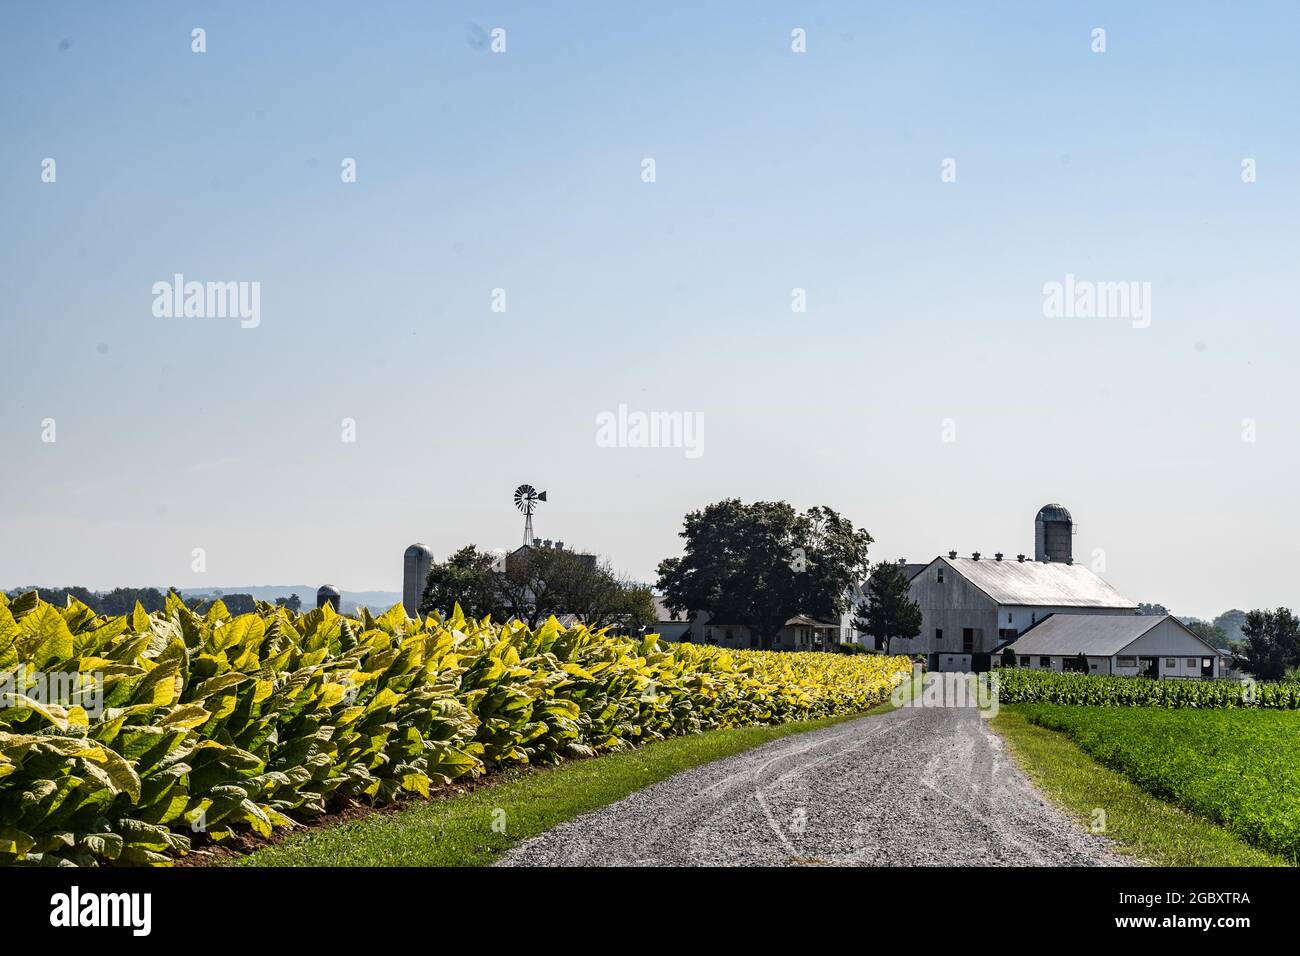 Lancaster County, Pennsylvania-August 5, 2021: Amish Farm with tabacco growing in field against a blue sky background Stock Photo